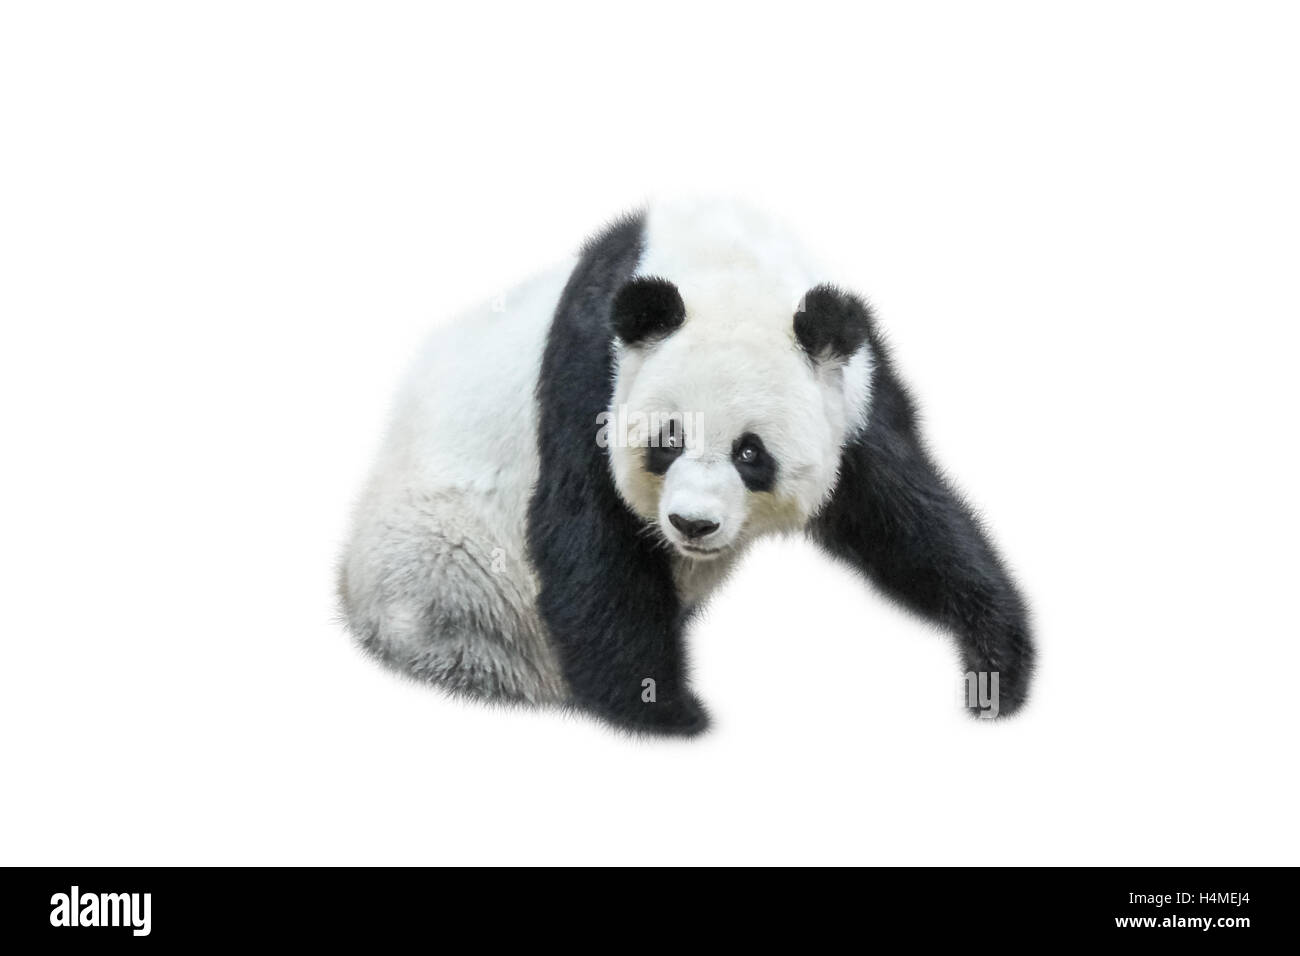 Giant panda Cut Out Stock Images & Pictures - Alamy